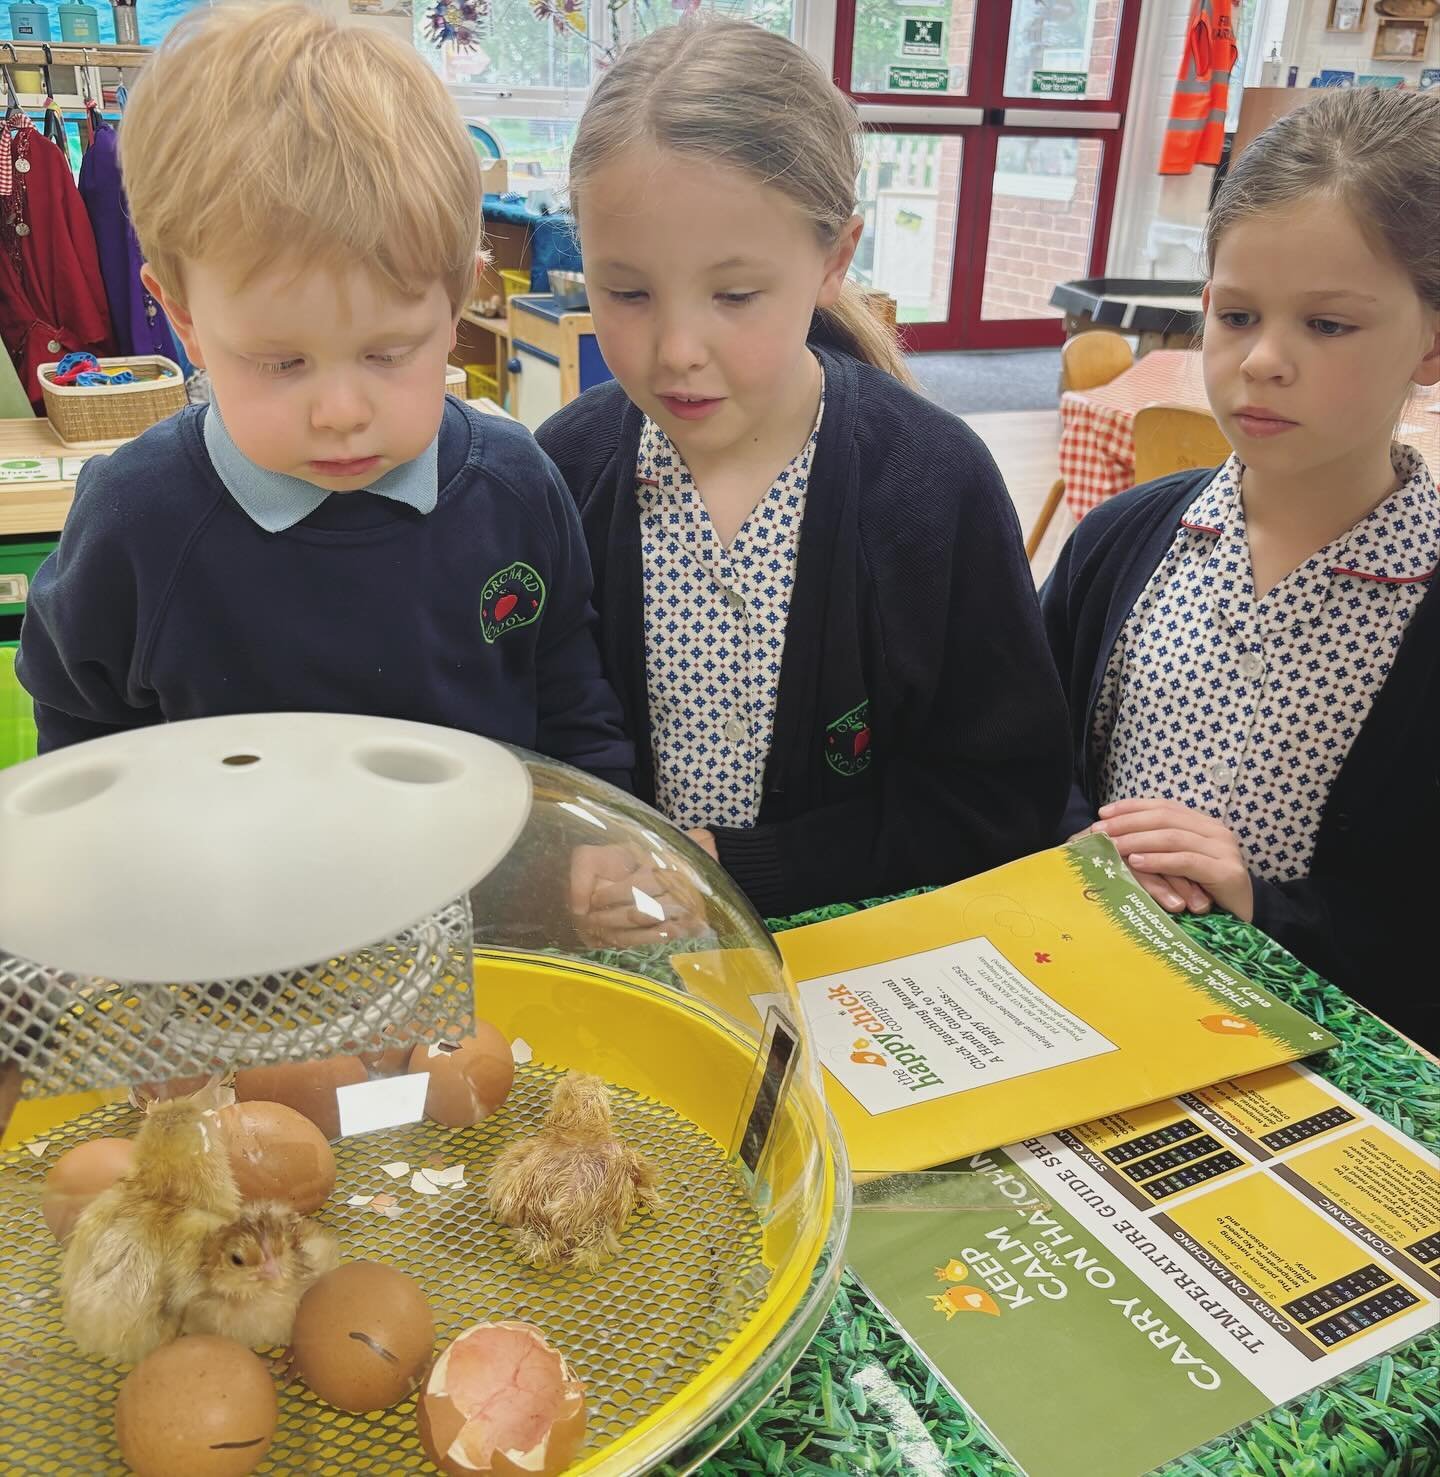 Our breakfast club has just had the pleasure of welcoming some new friends to the school. 🐣🐣🐣

#orchardschoolandnursery #hatchingeggs